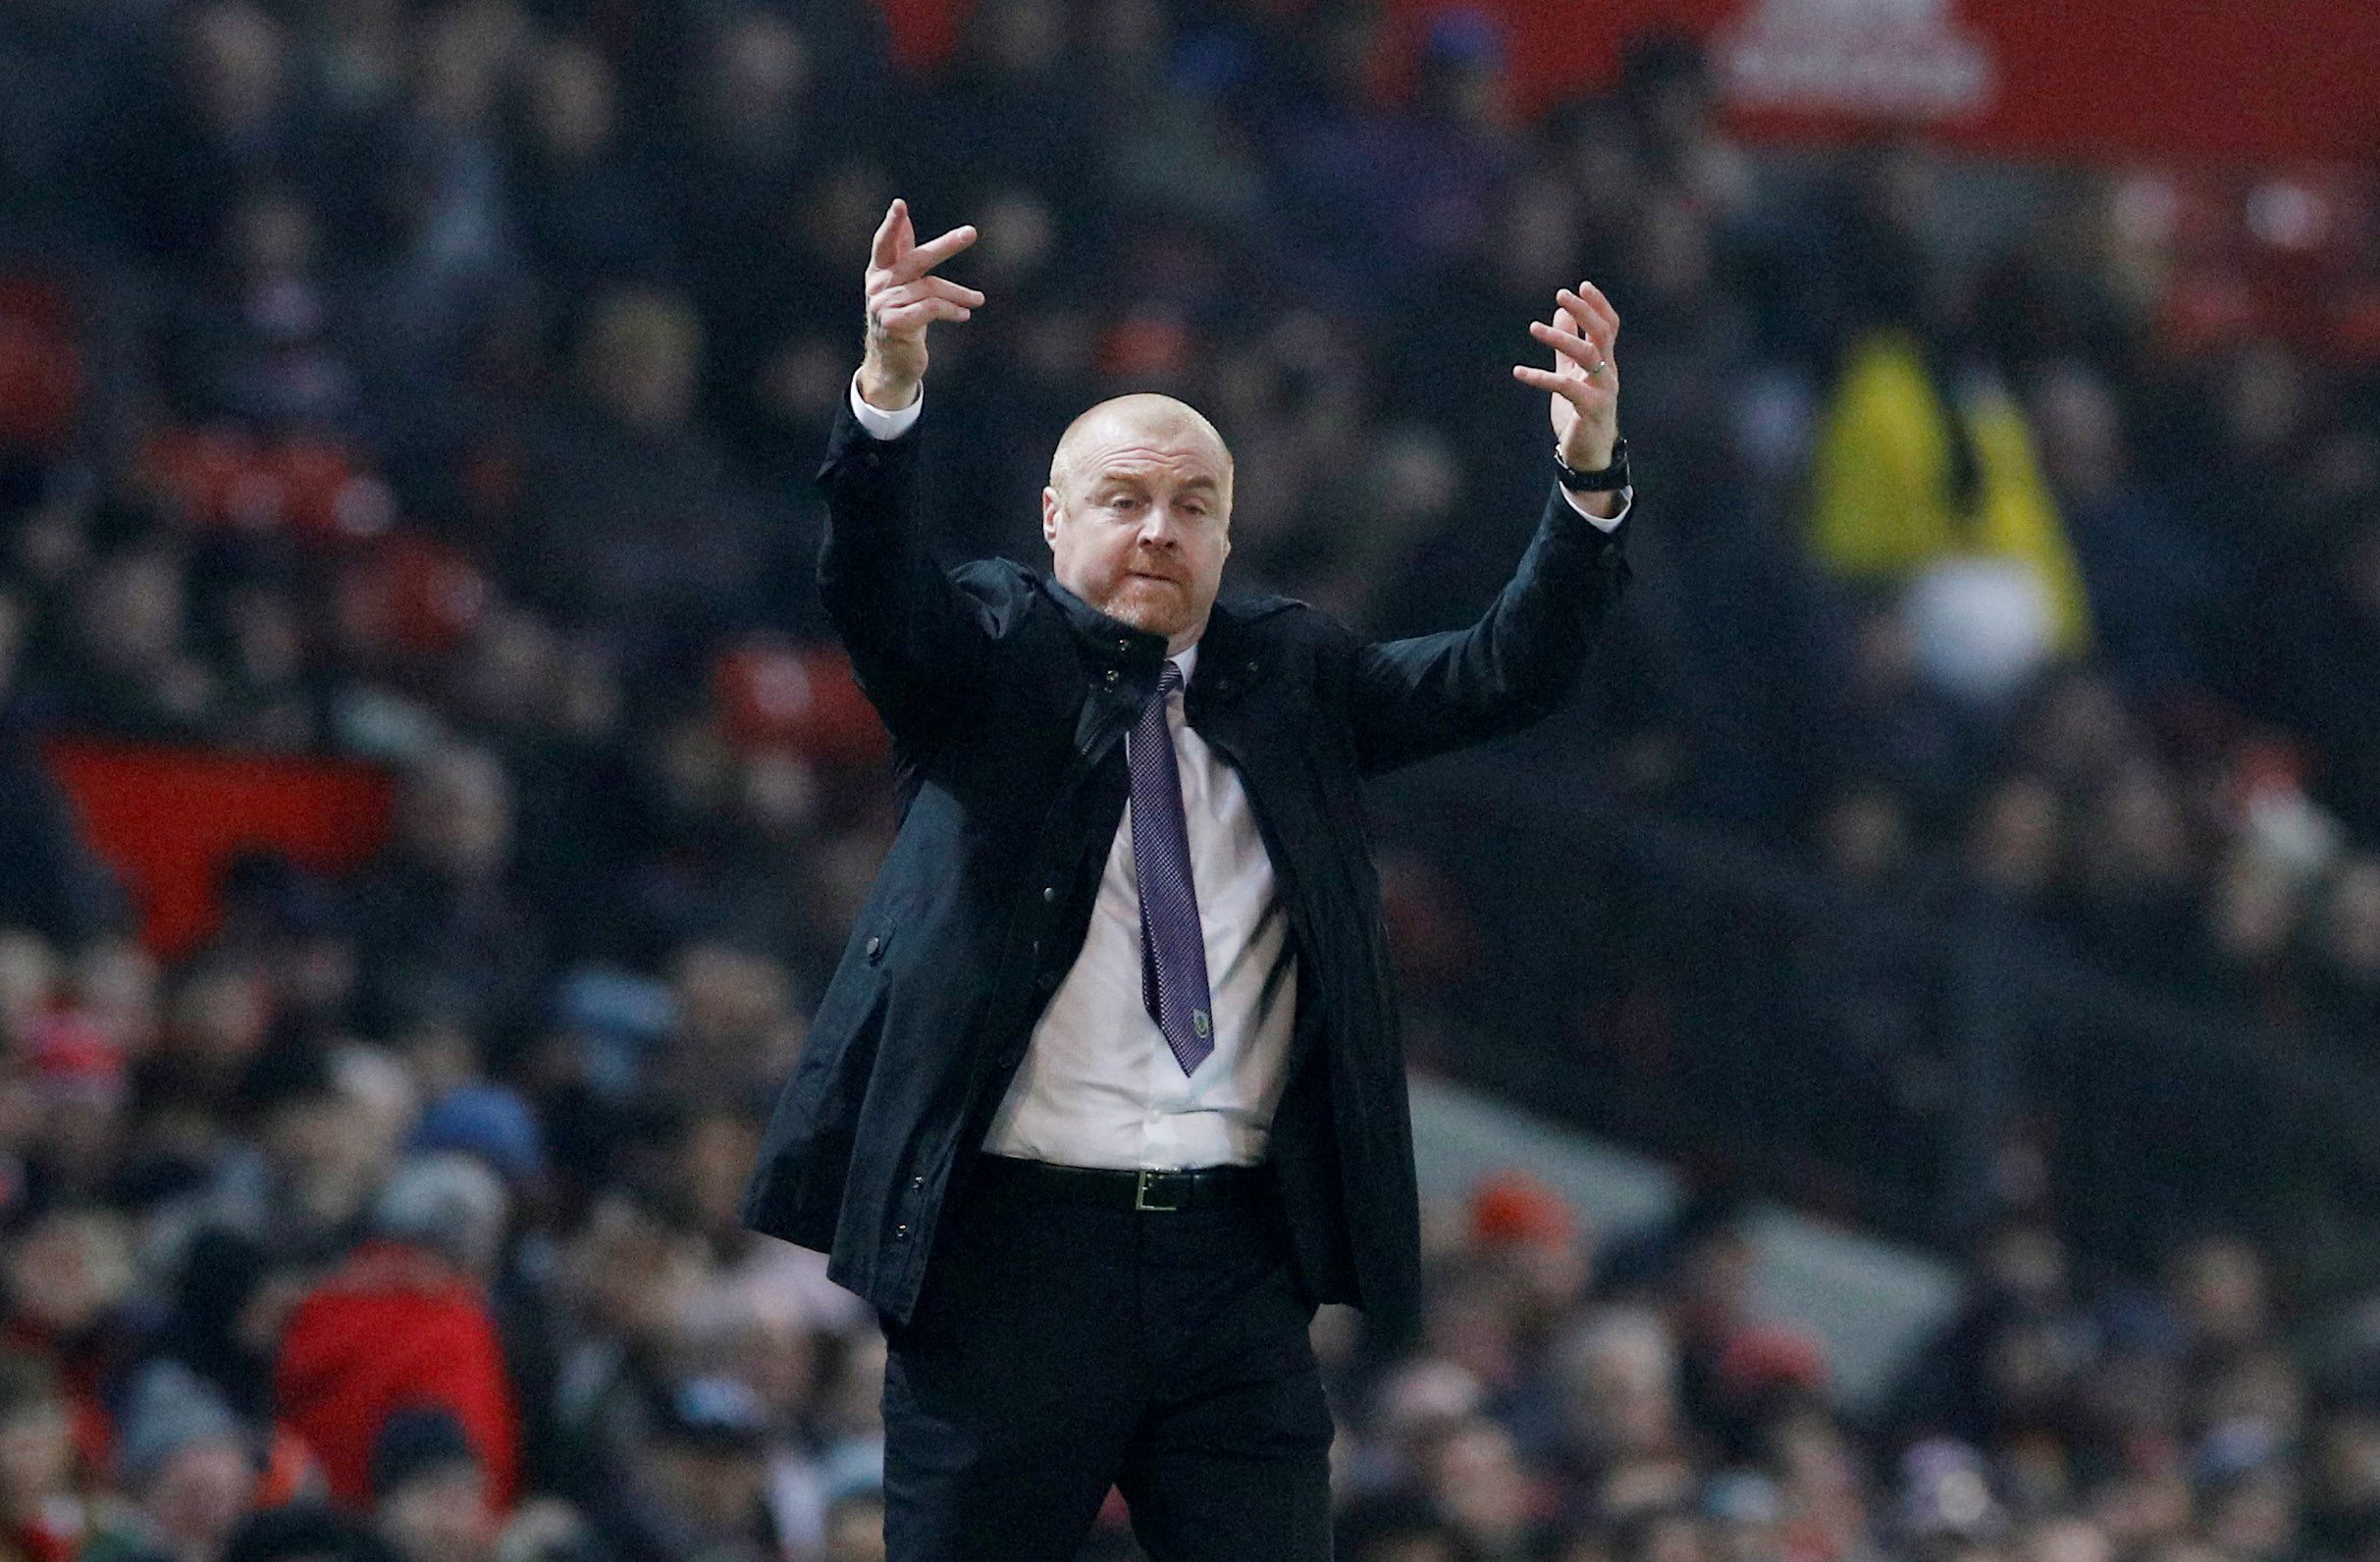 FILE PHOTO: Soccer Football - Premier League - Manchester United v Burnley - Old Trafford, Manchester, Britain - January 22, 2020  Burnley manager Sean Dyche reacts REUTERS/Phil Noble  EDITORIAL USE ONLY. No use with unauthorized audio, video, data, fixture lists, club/league logos or 